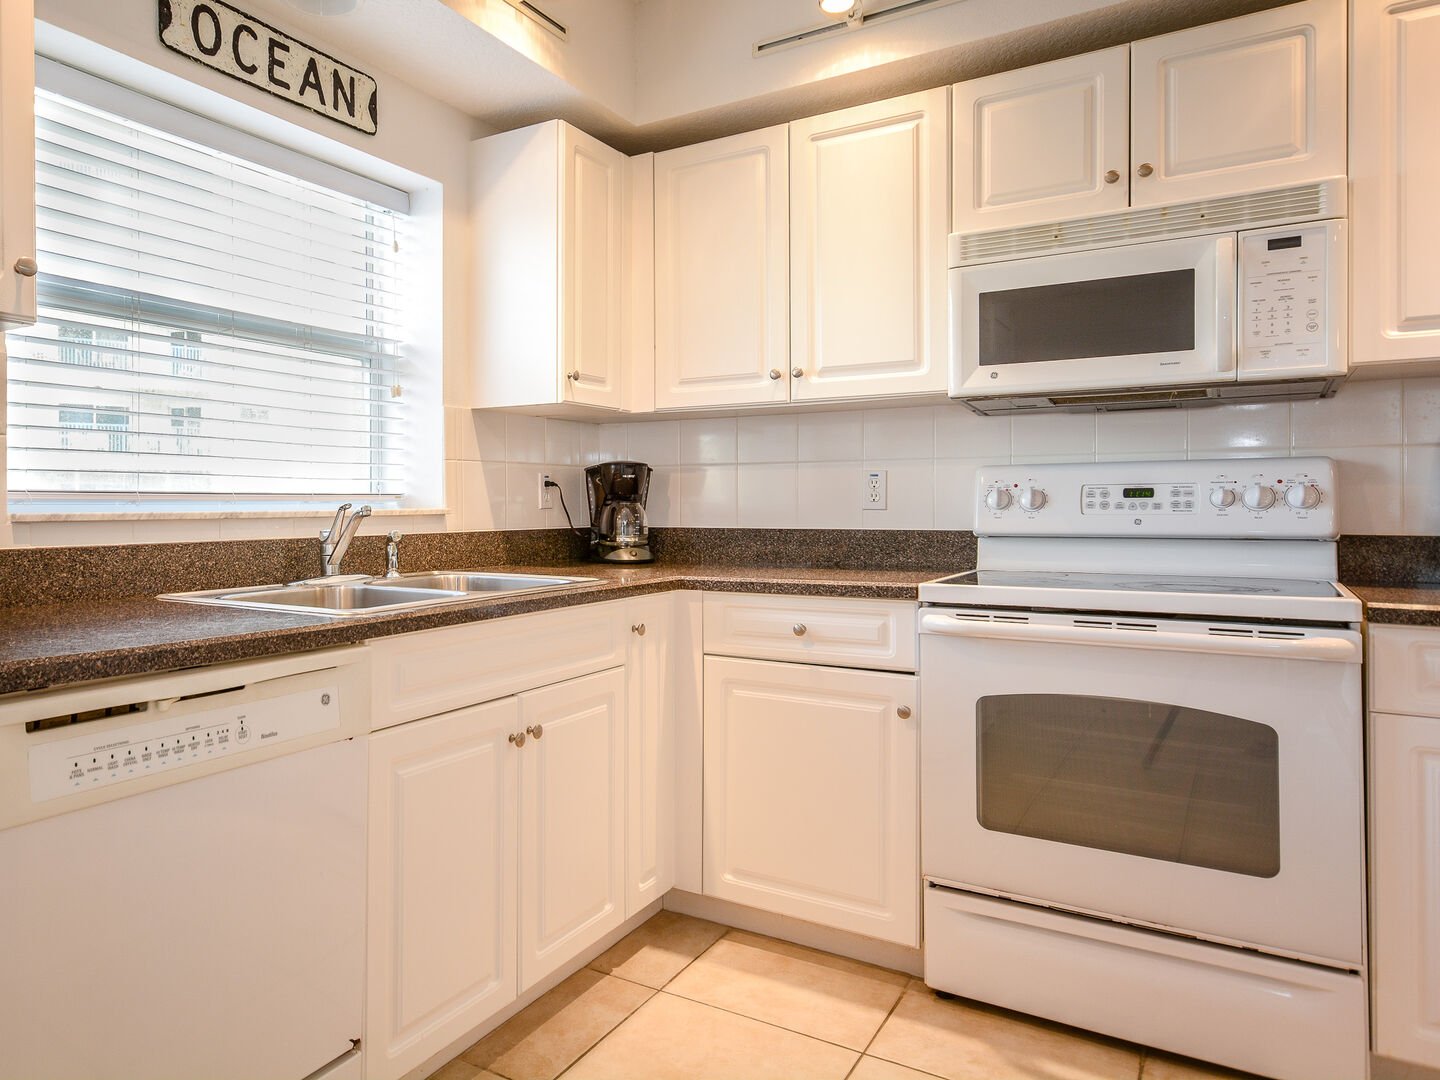 Fully equipped kitchen with additional seating for 3 at the kitchen counter.